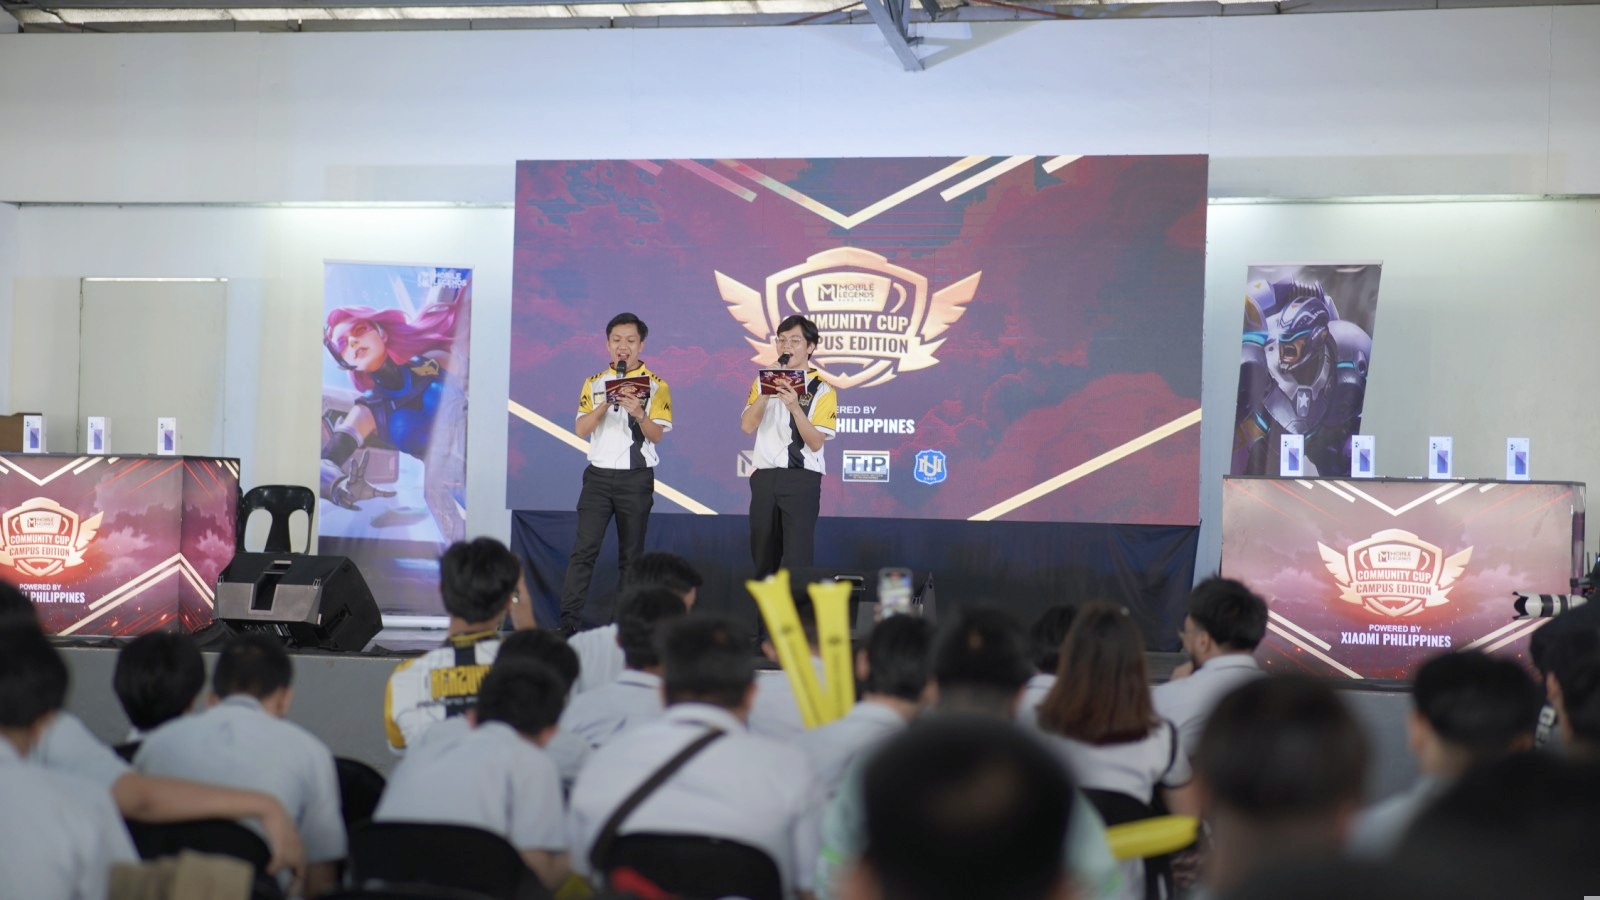 The MLBB Community Cup Brings Healthy Gaming to Schools (Mobile Legends x Xiaomi)